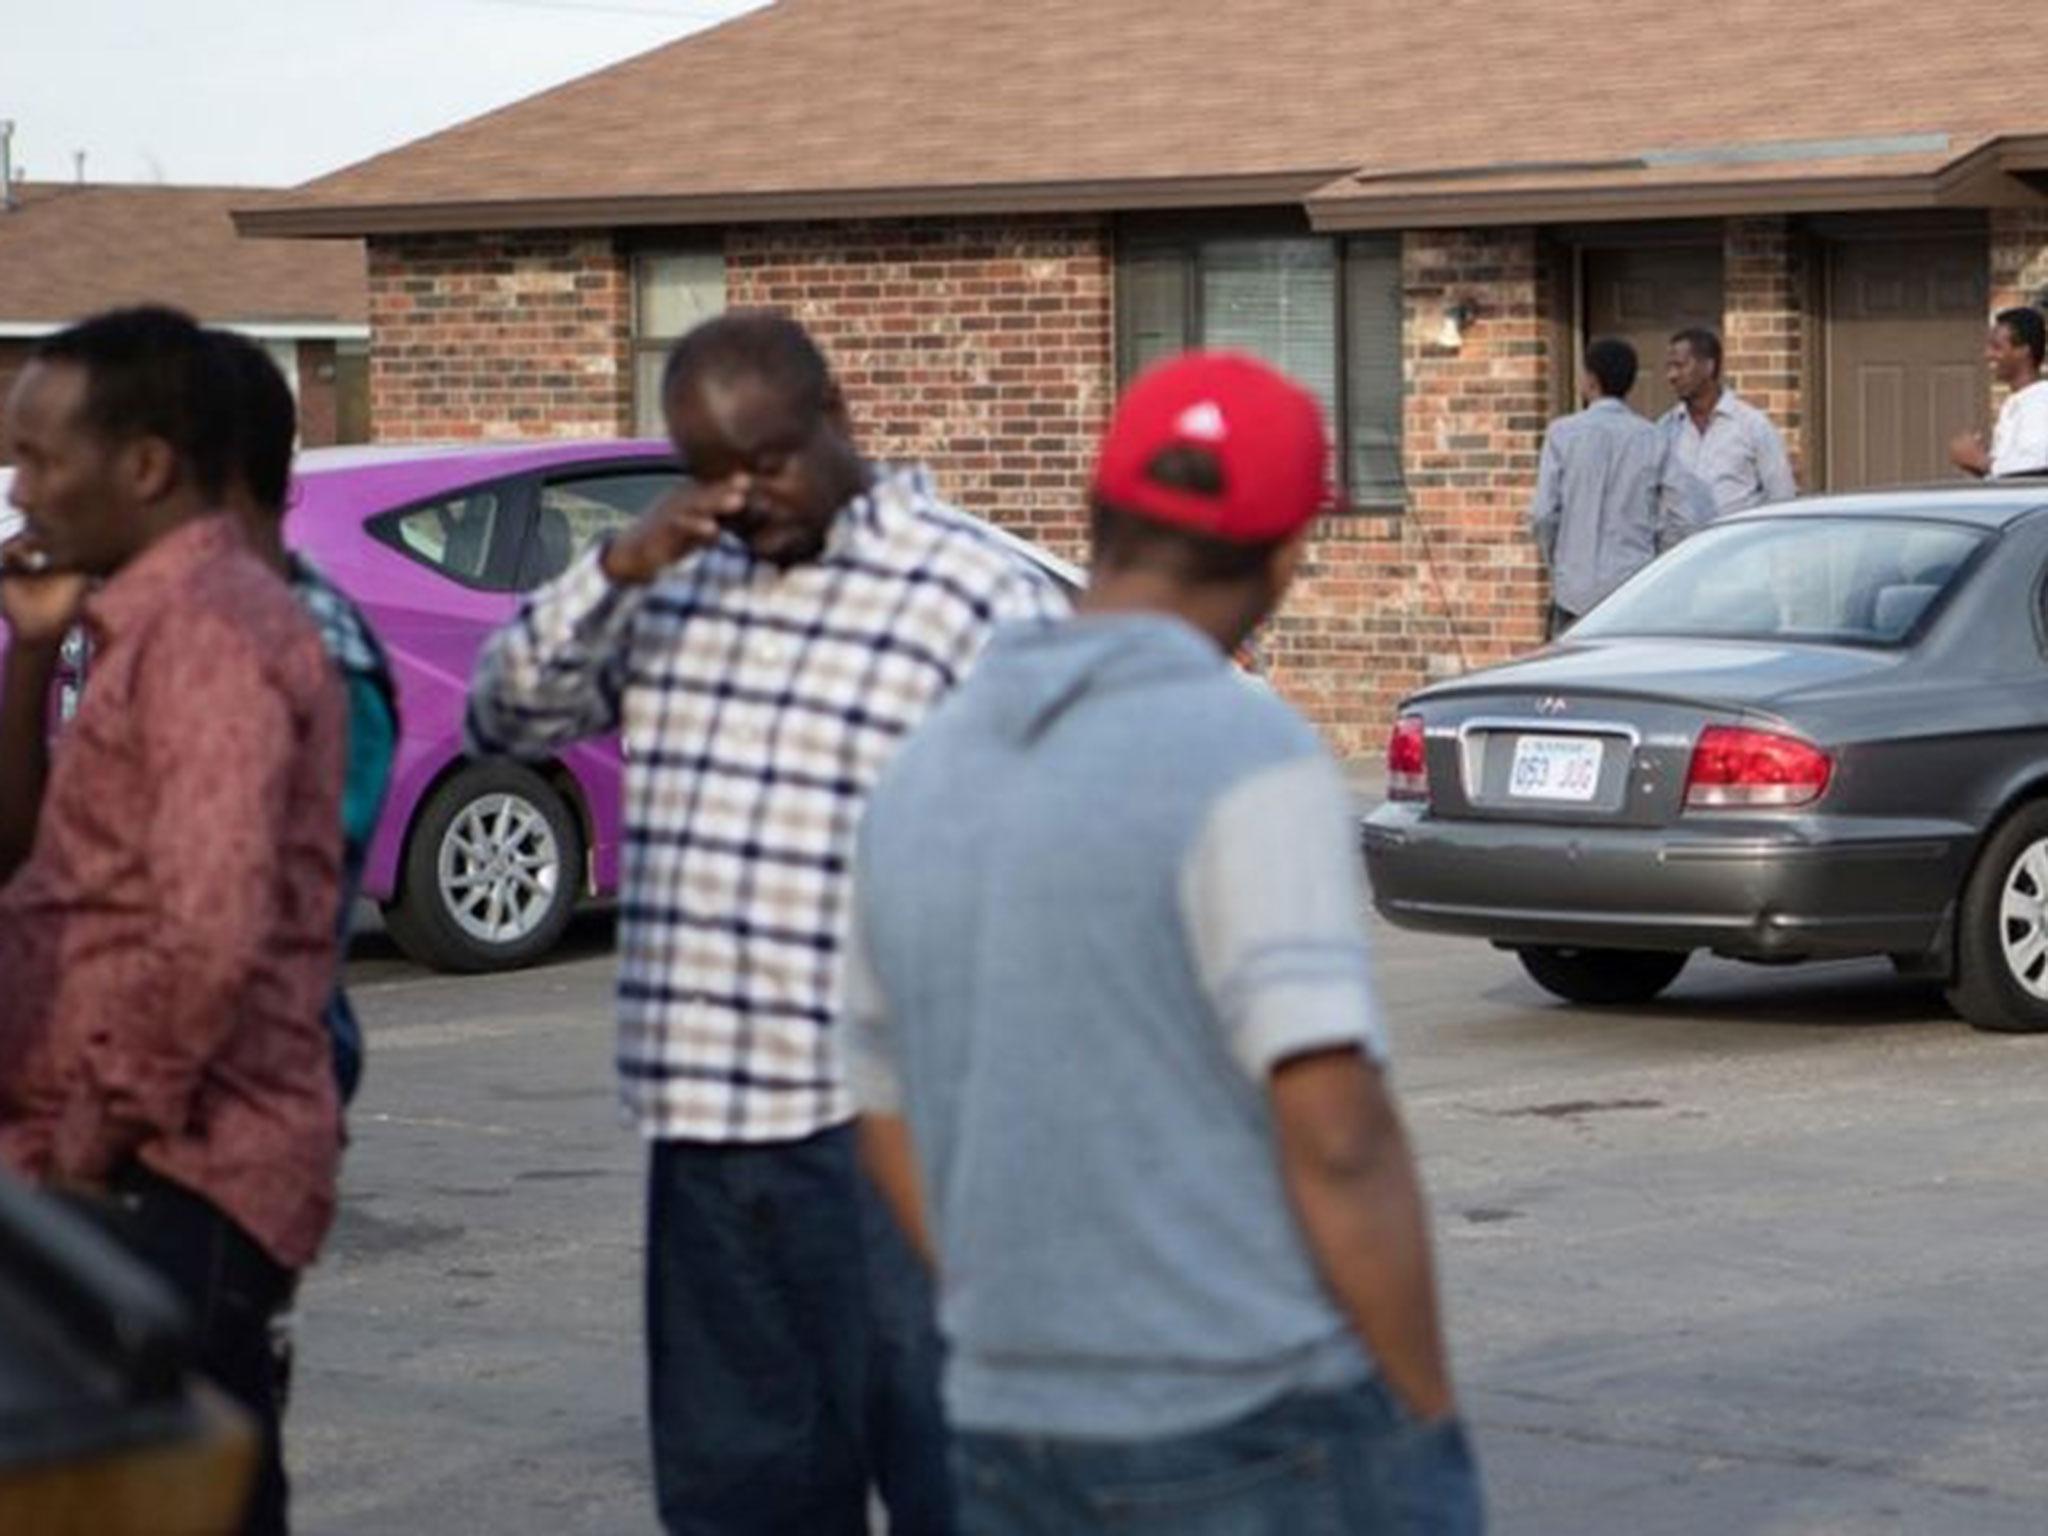 People stand outside a mosque located within an apartment complex, which federal authorities allege was to be targeted in a bomb plot by three Kansas men, in Garden City, Kansas, US, 14 October, 2016